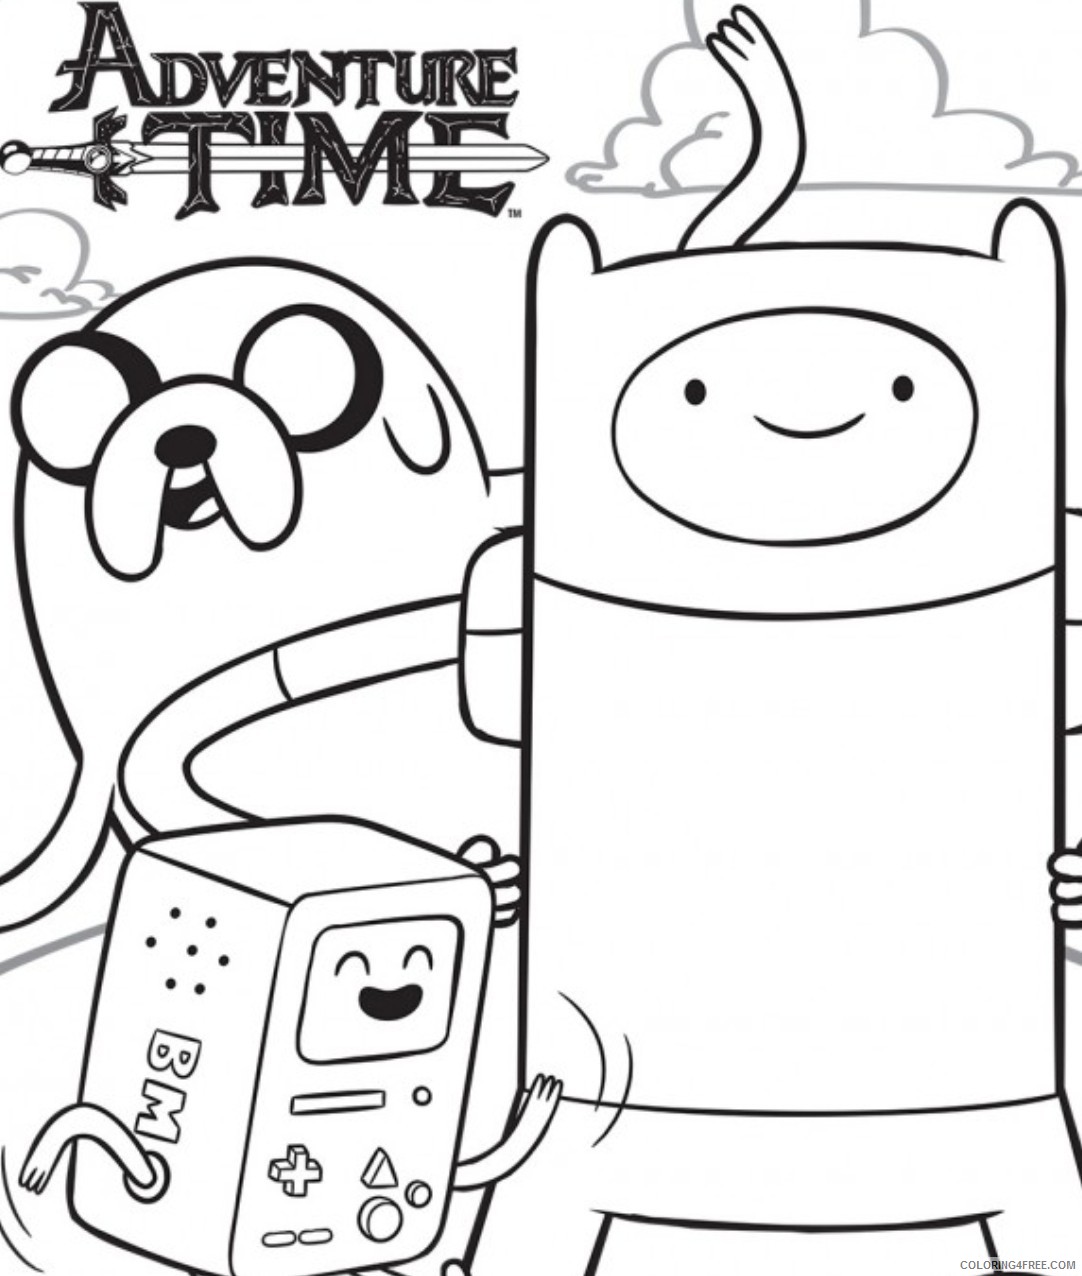 Adventure Time Coloring Pages Cartoons Adventure Time Printable 2020 0242 Coloring4free